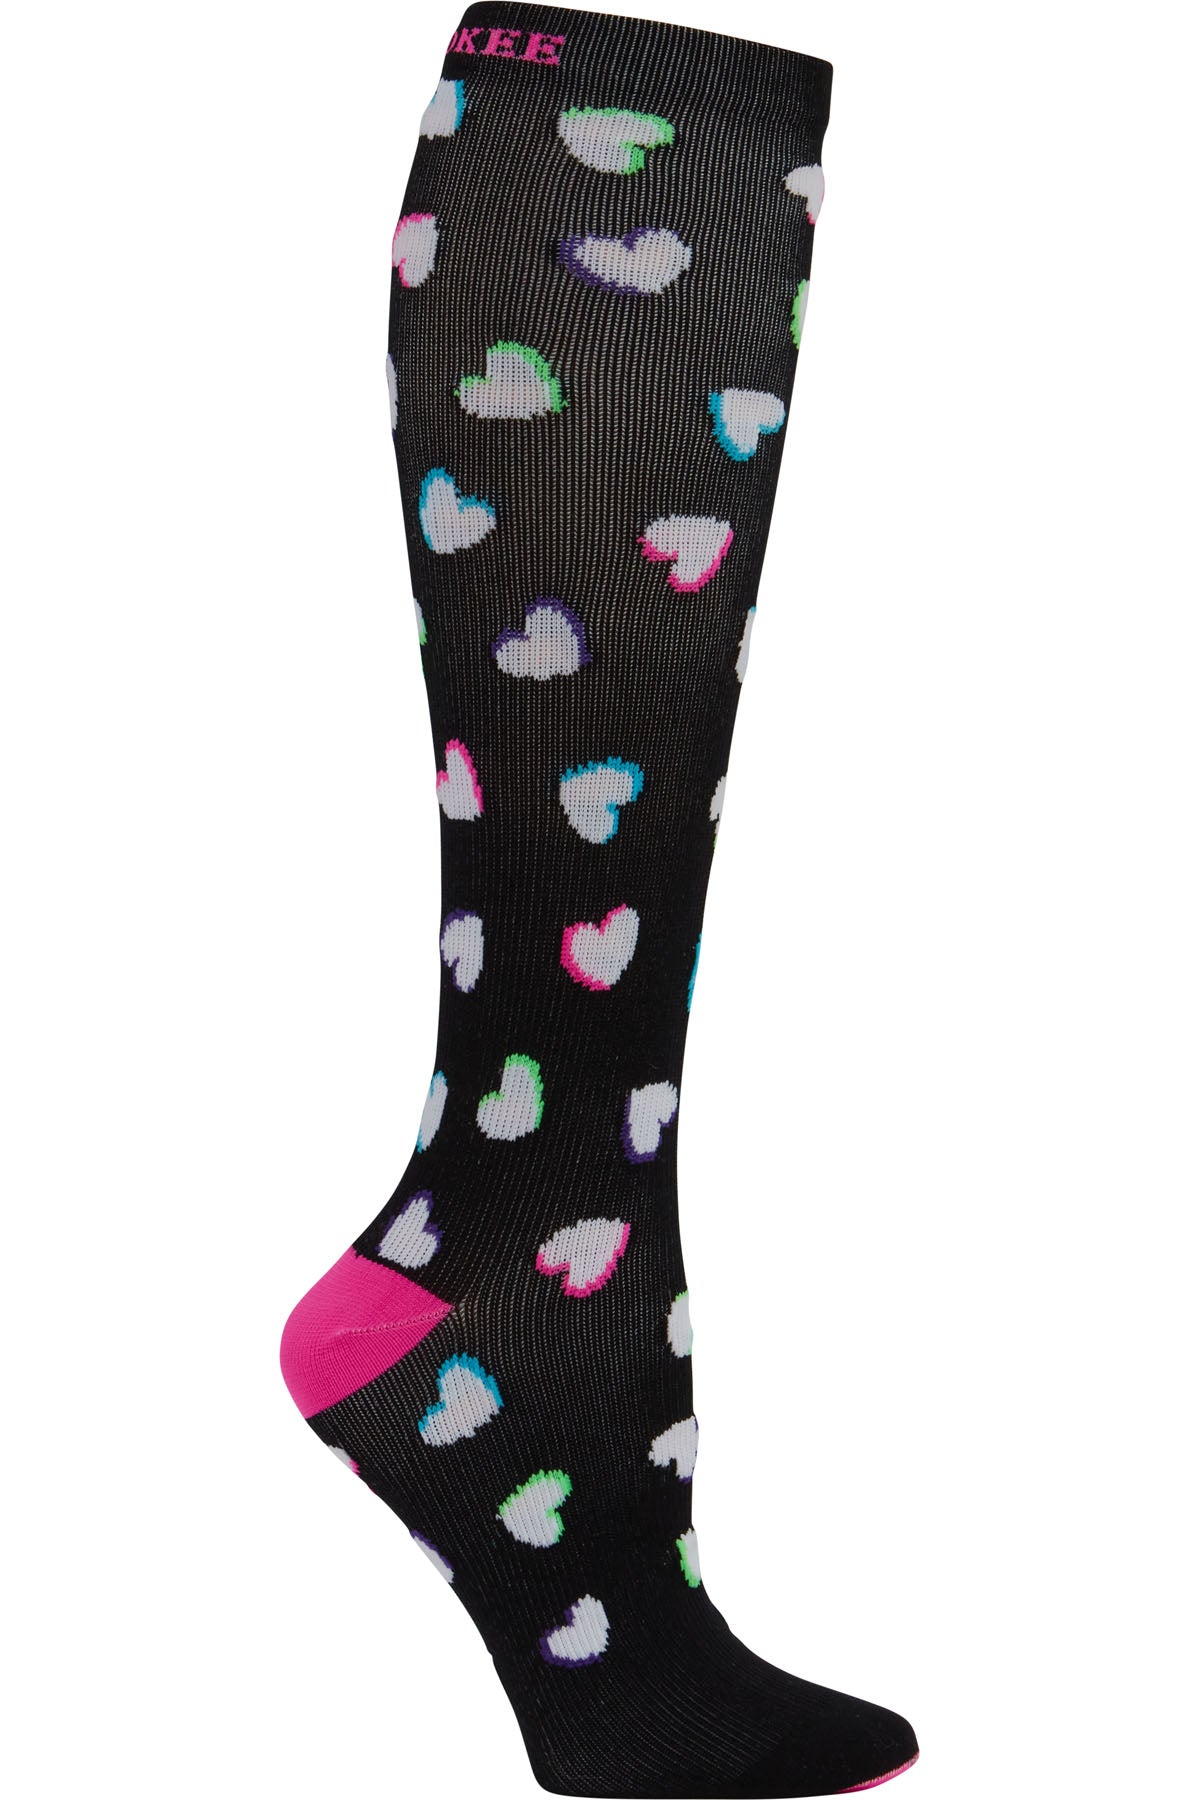 Cherokee Plus Size Print Support Mild Compression Socks Wide Calf 8-12 mmHg Neon Hearts at Parker's Clothing and Shoes